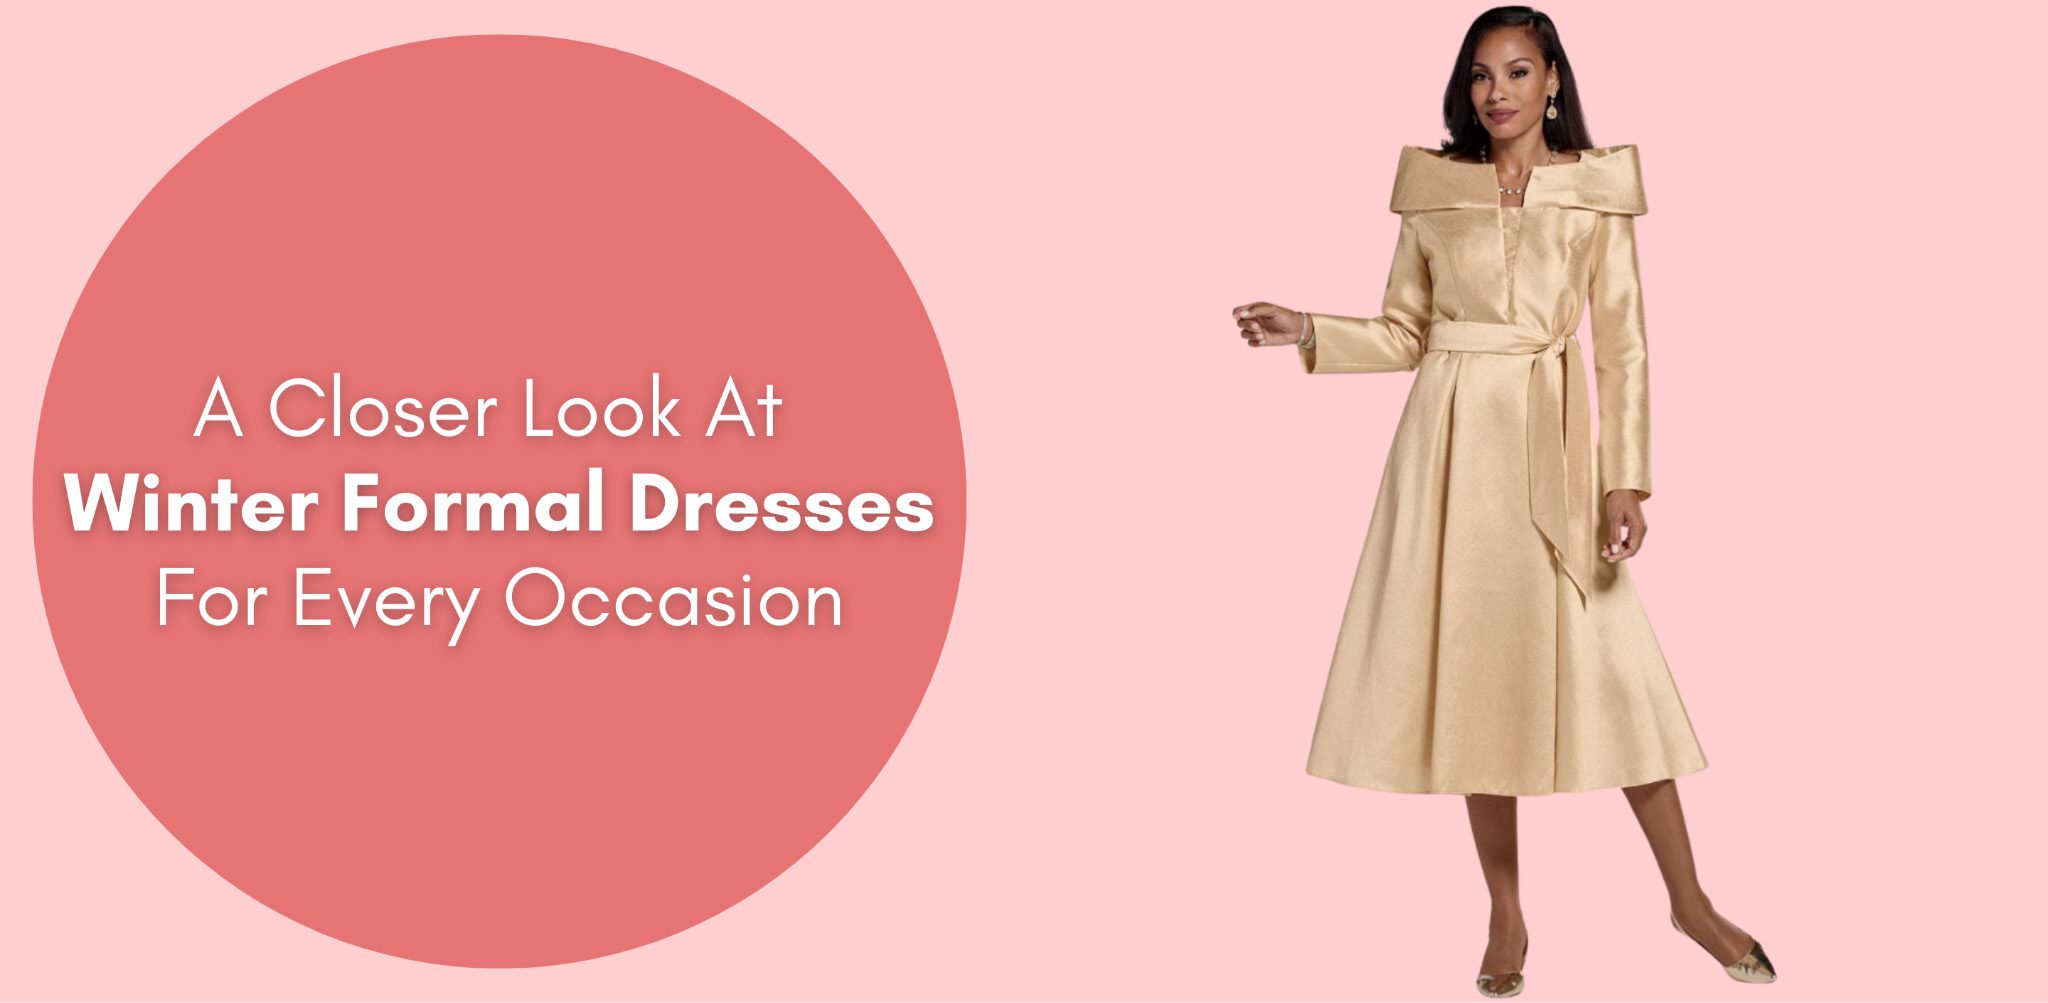 A Closer Look At Winter Formal Dresses For Every Occasion